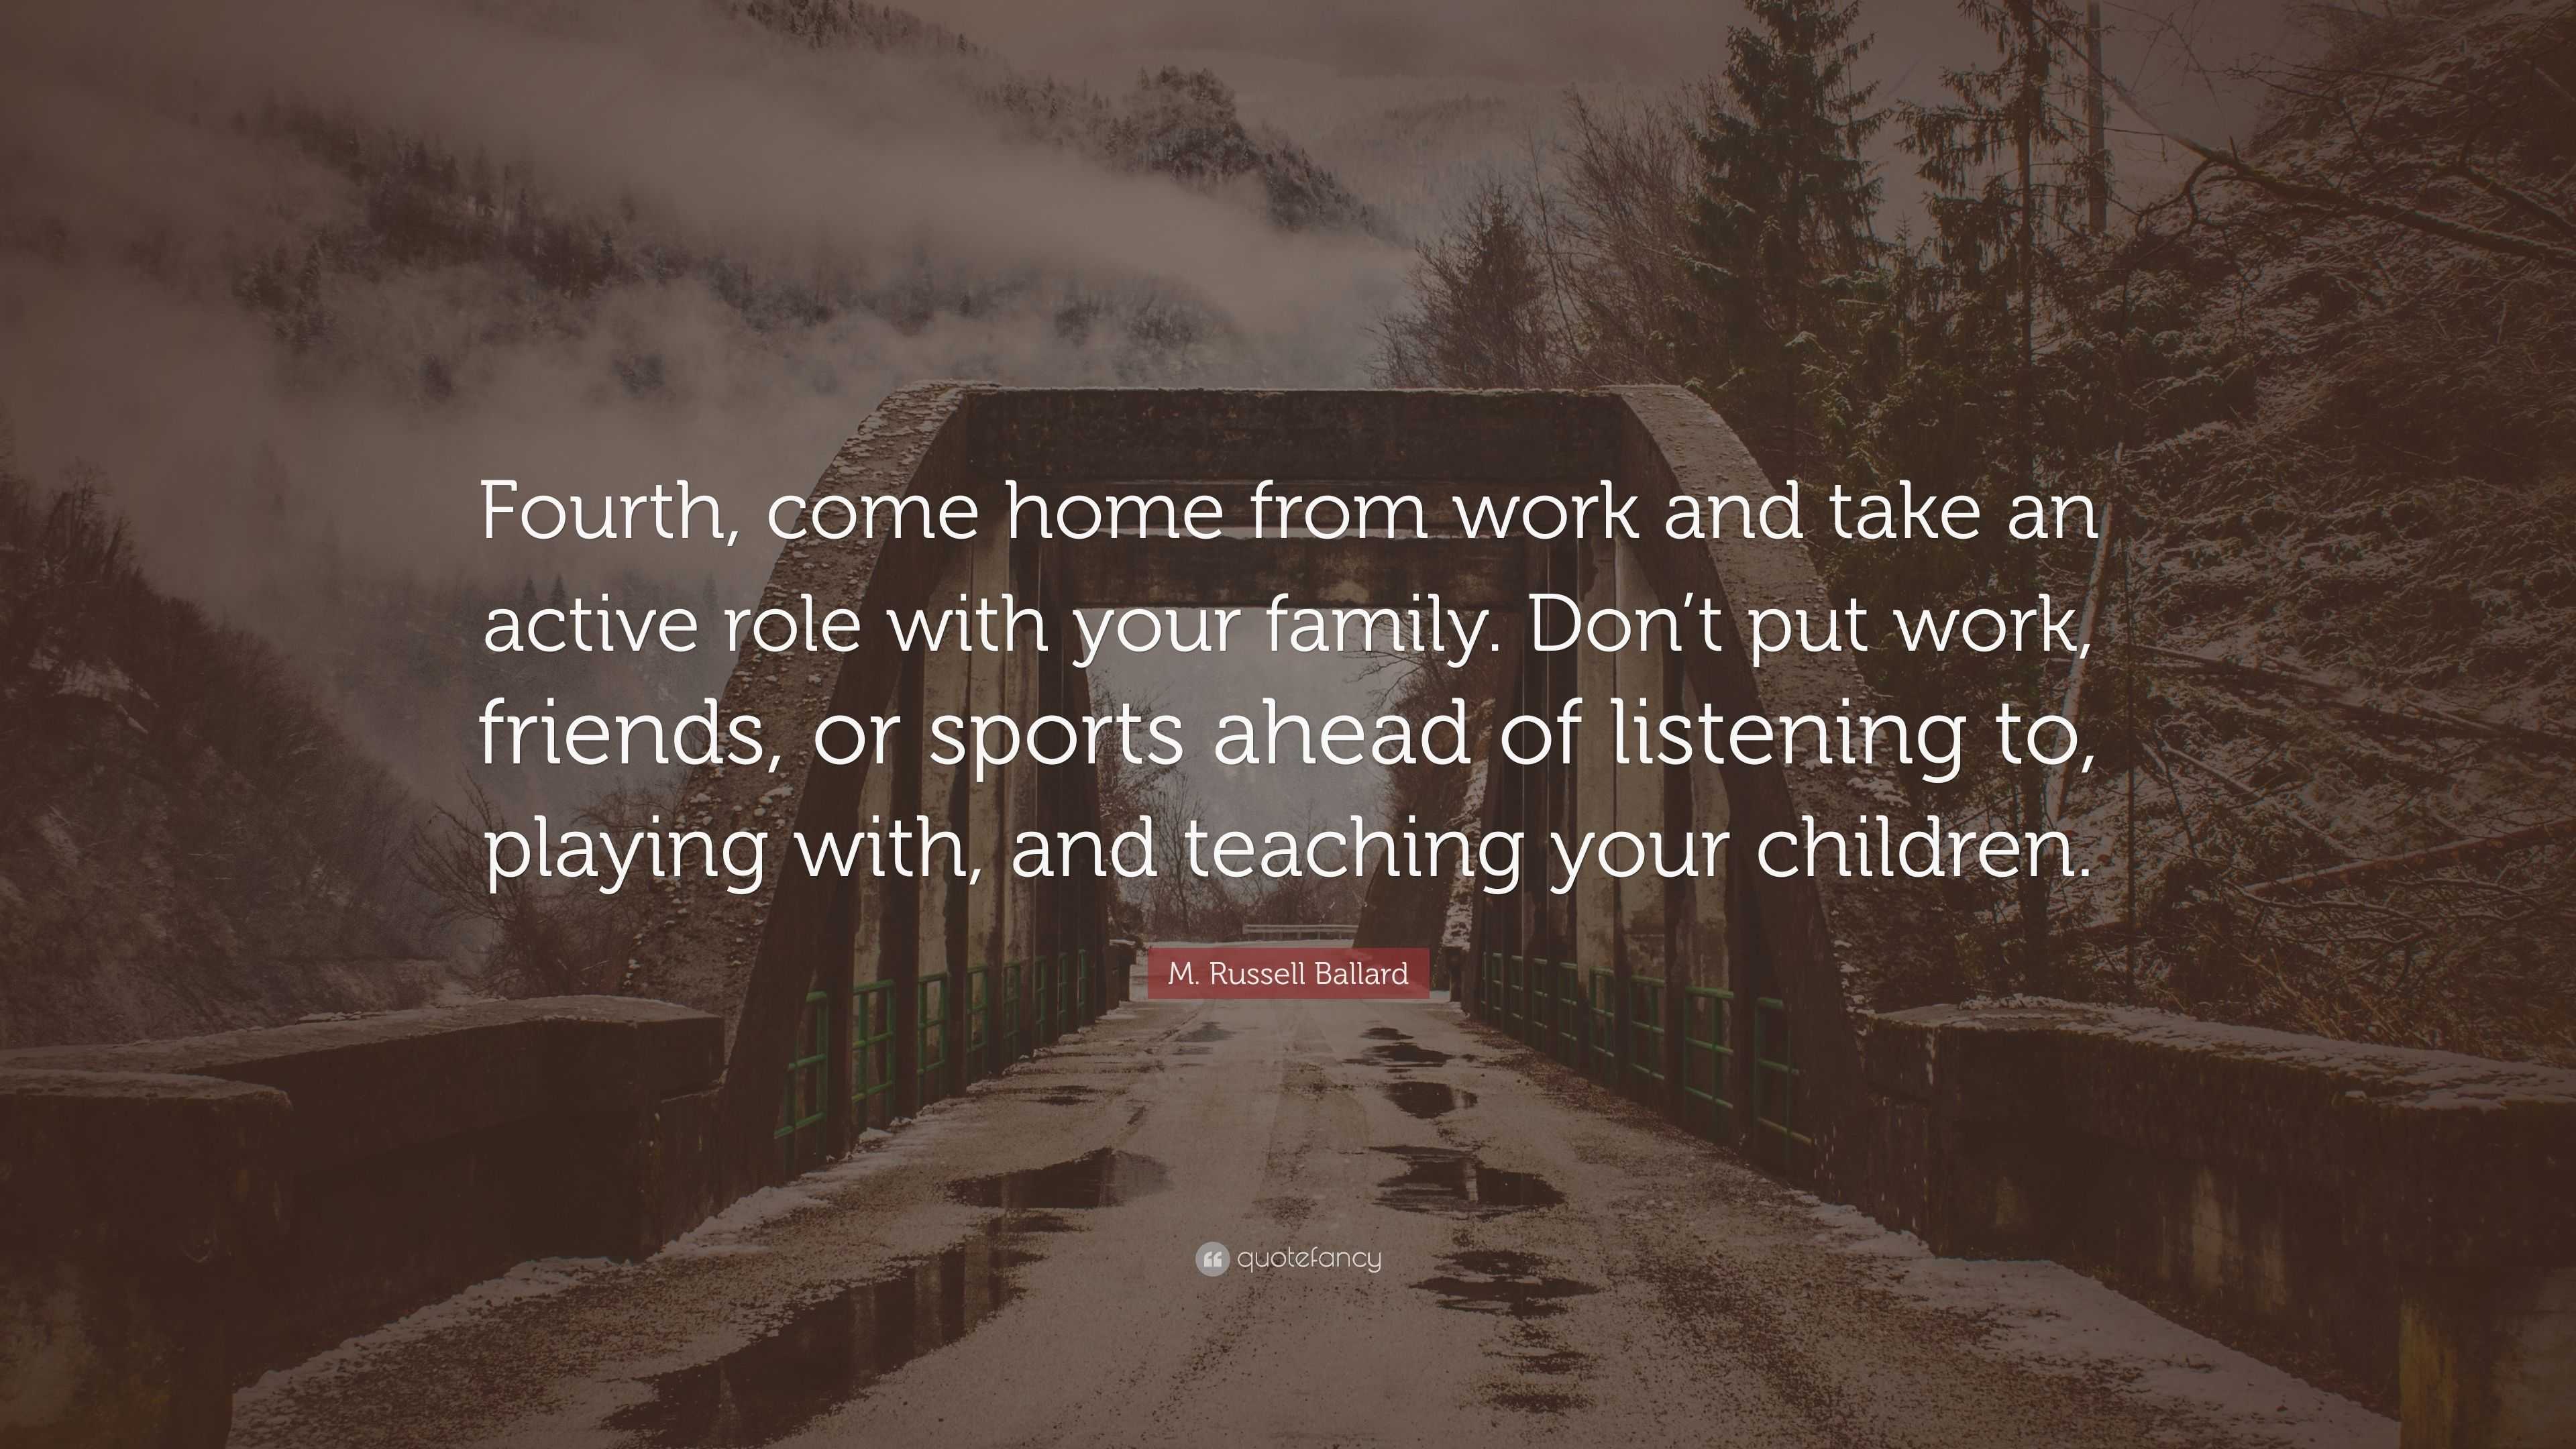 M. Russell Ballard Quote: "Fourth, come home from work and take an act...